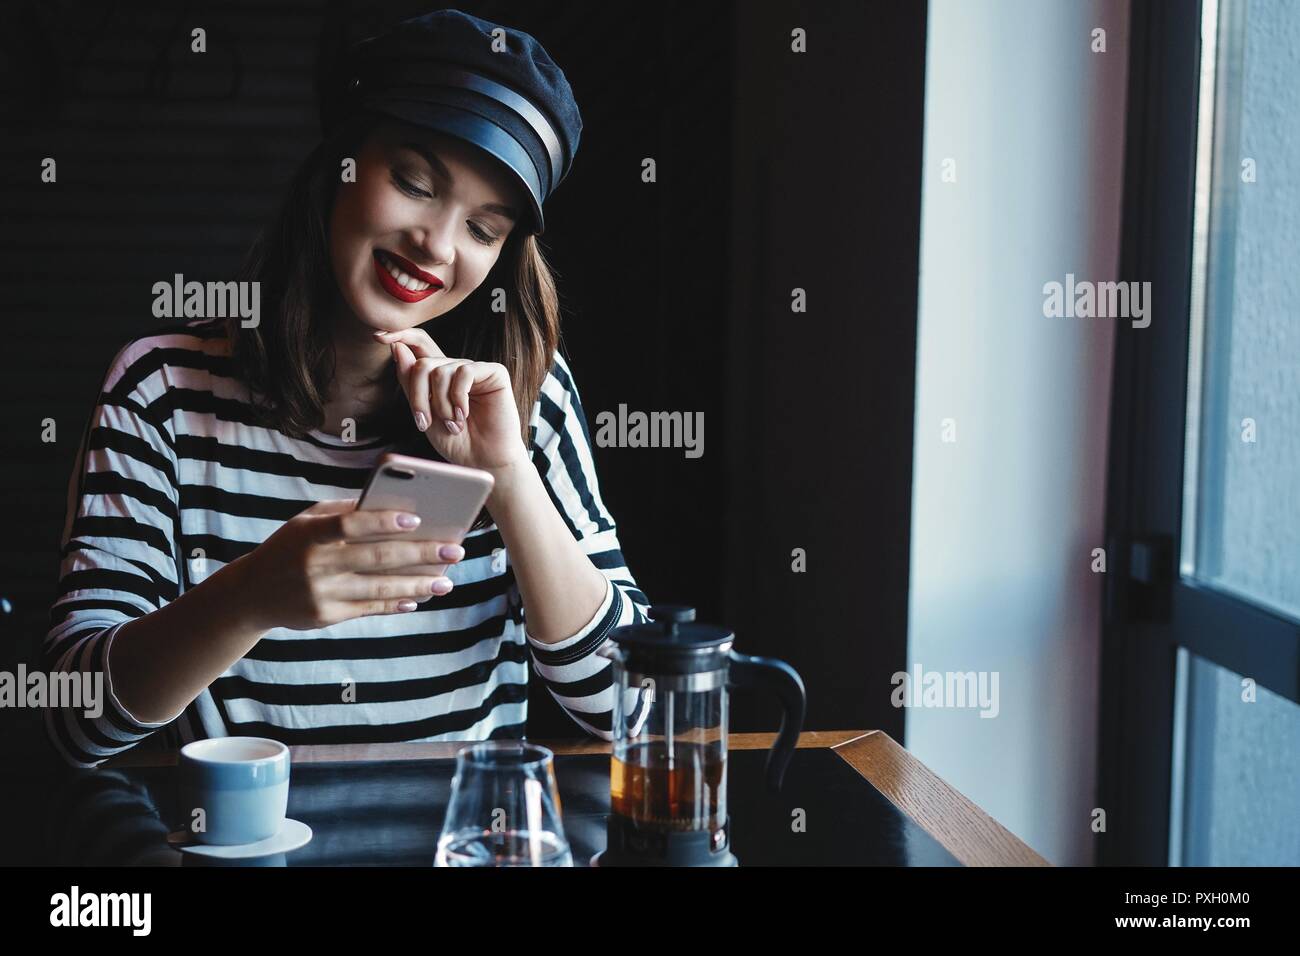 Portrait of young beautiful woman using her mobile phone in cafe. Stock Photo